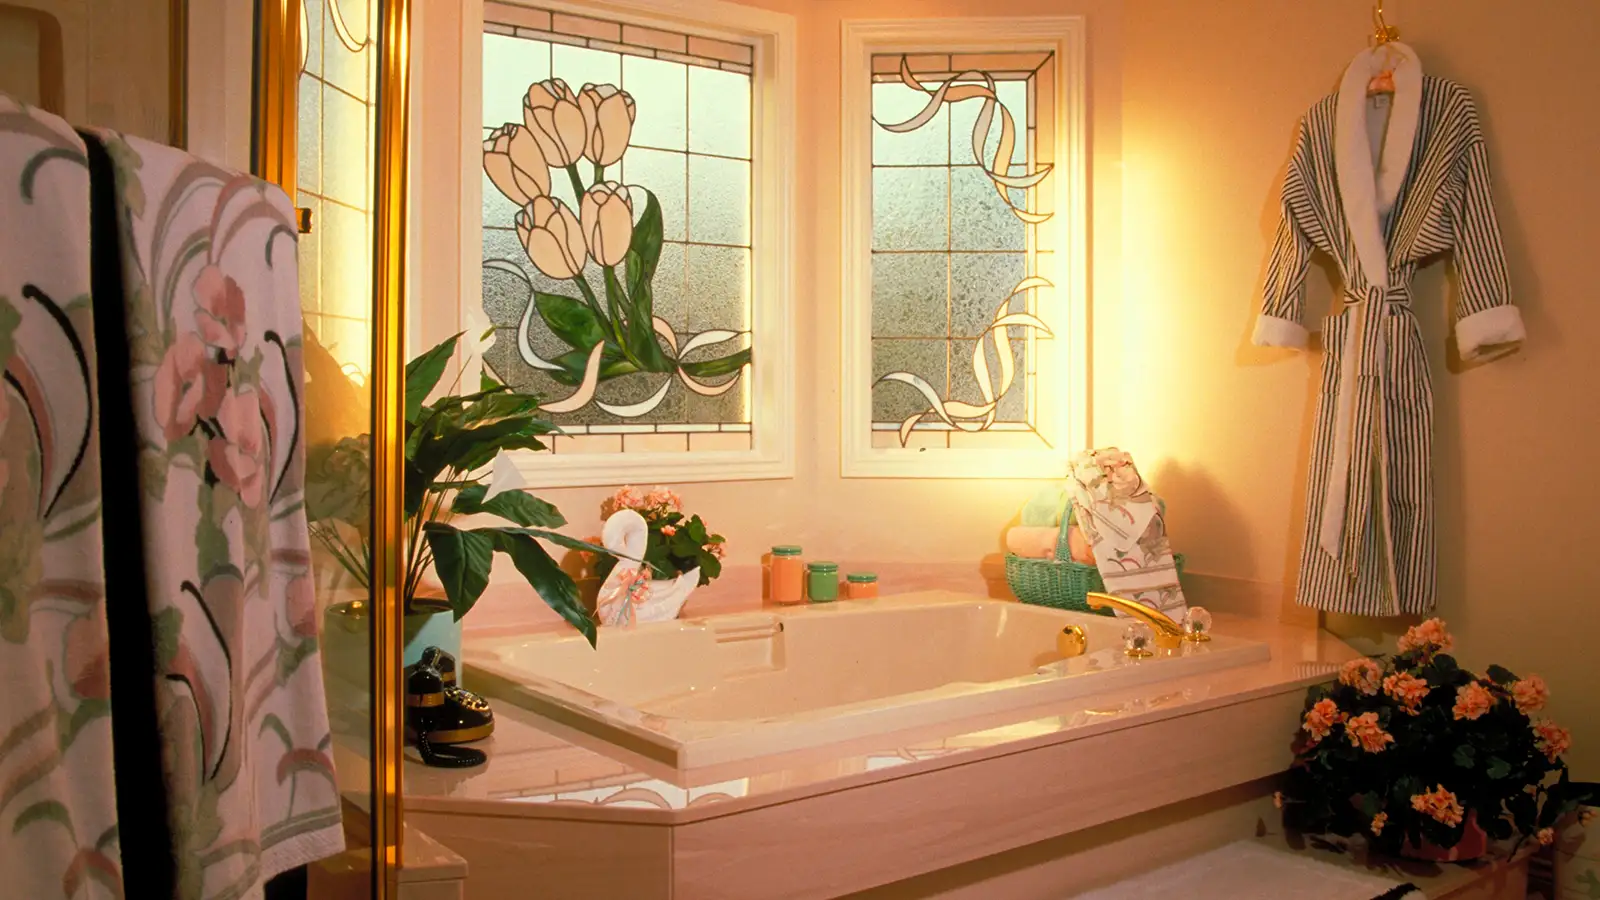 Small bathroom counter decorating ideas: a bathroom with a stained glass window.